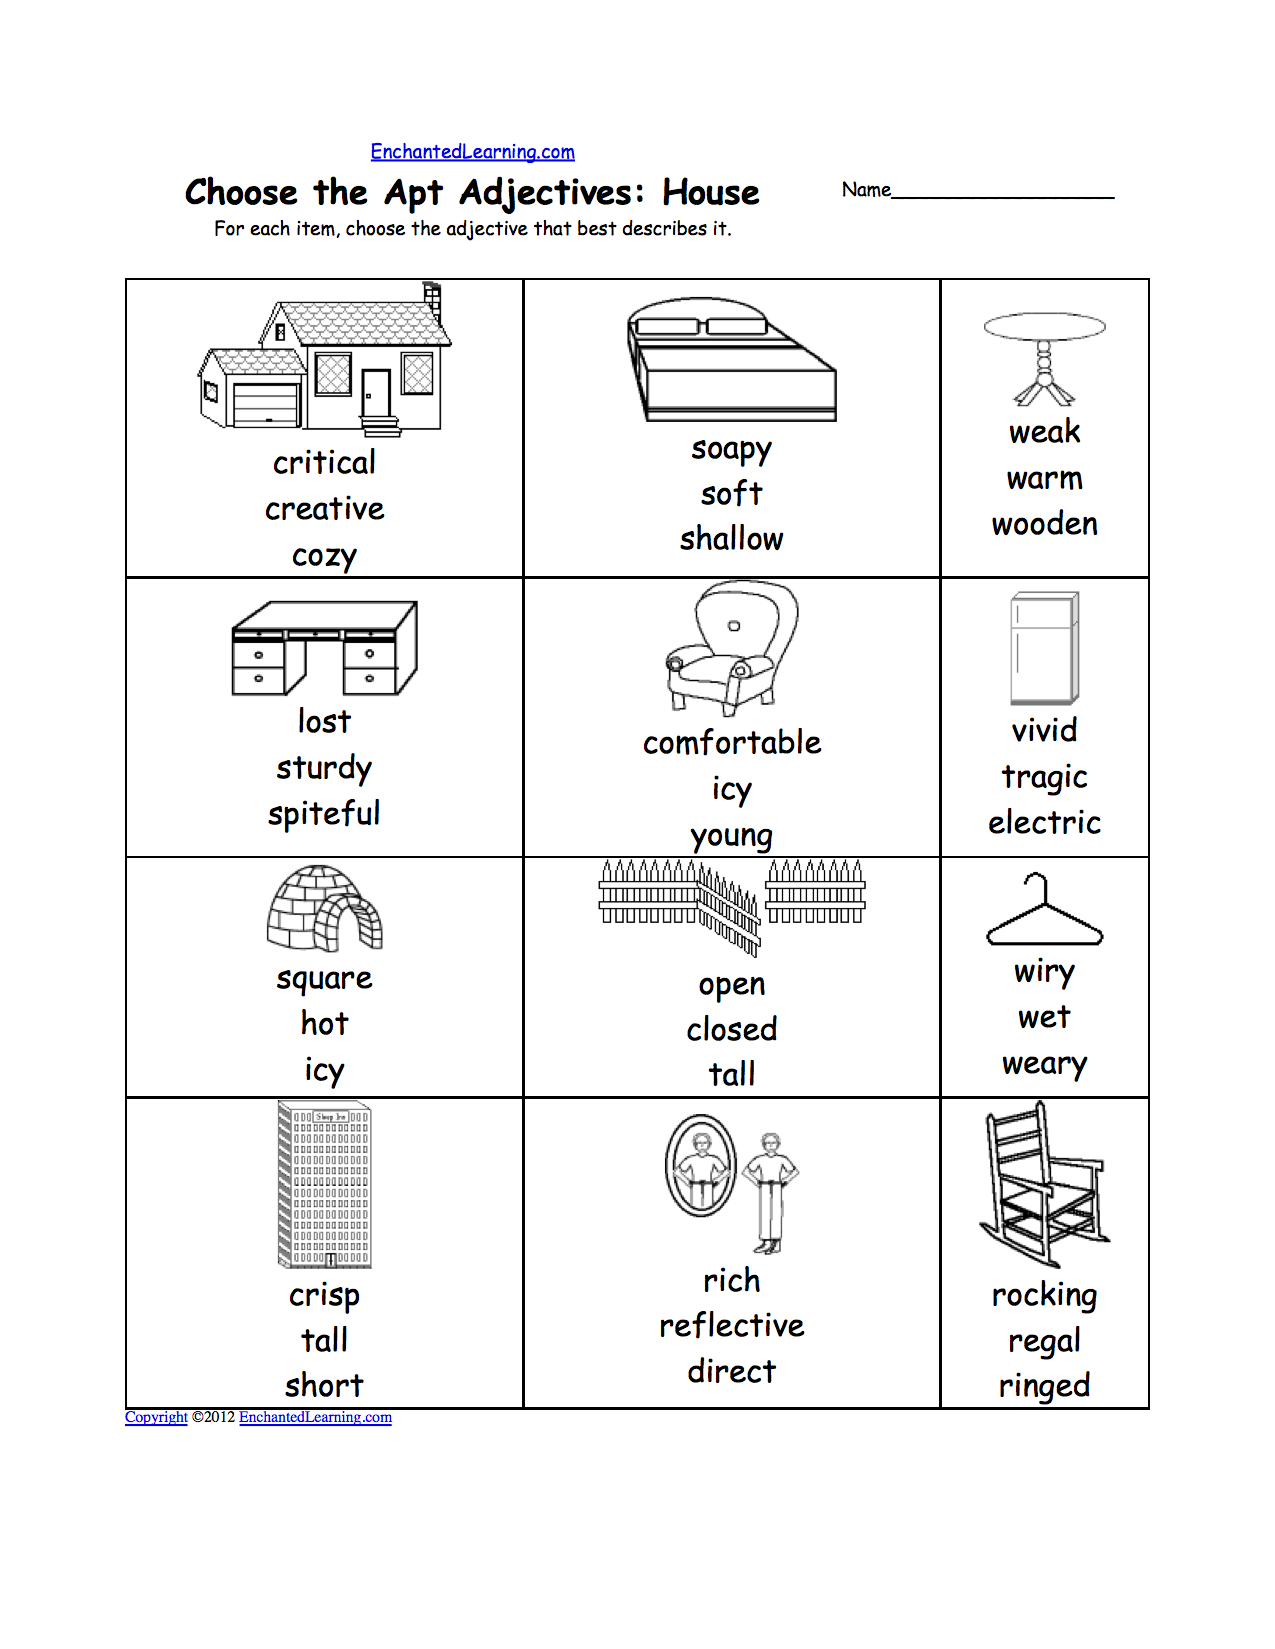 House adjective. Adjectives about House. Types of Hotels Worksheet. Parts of the House Worksheets. Describing a House adjectives Worksheets.